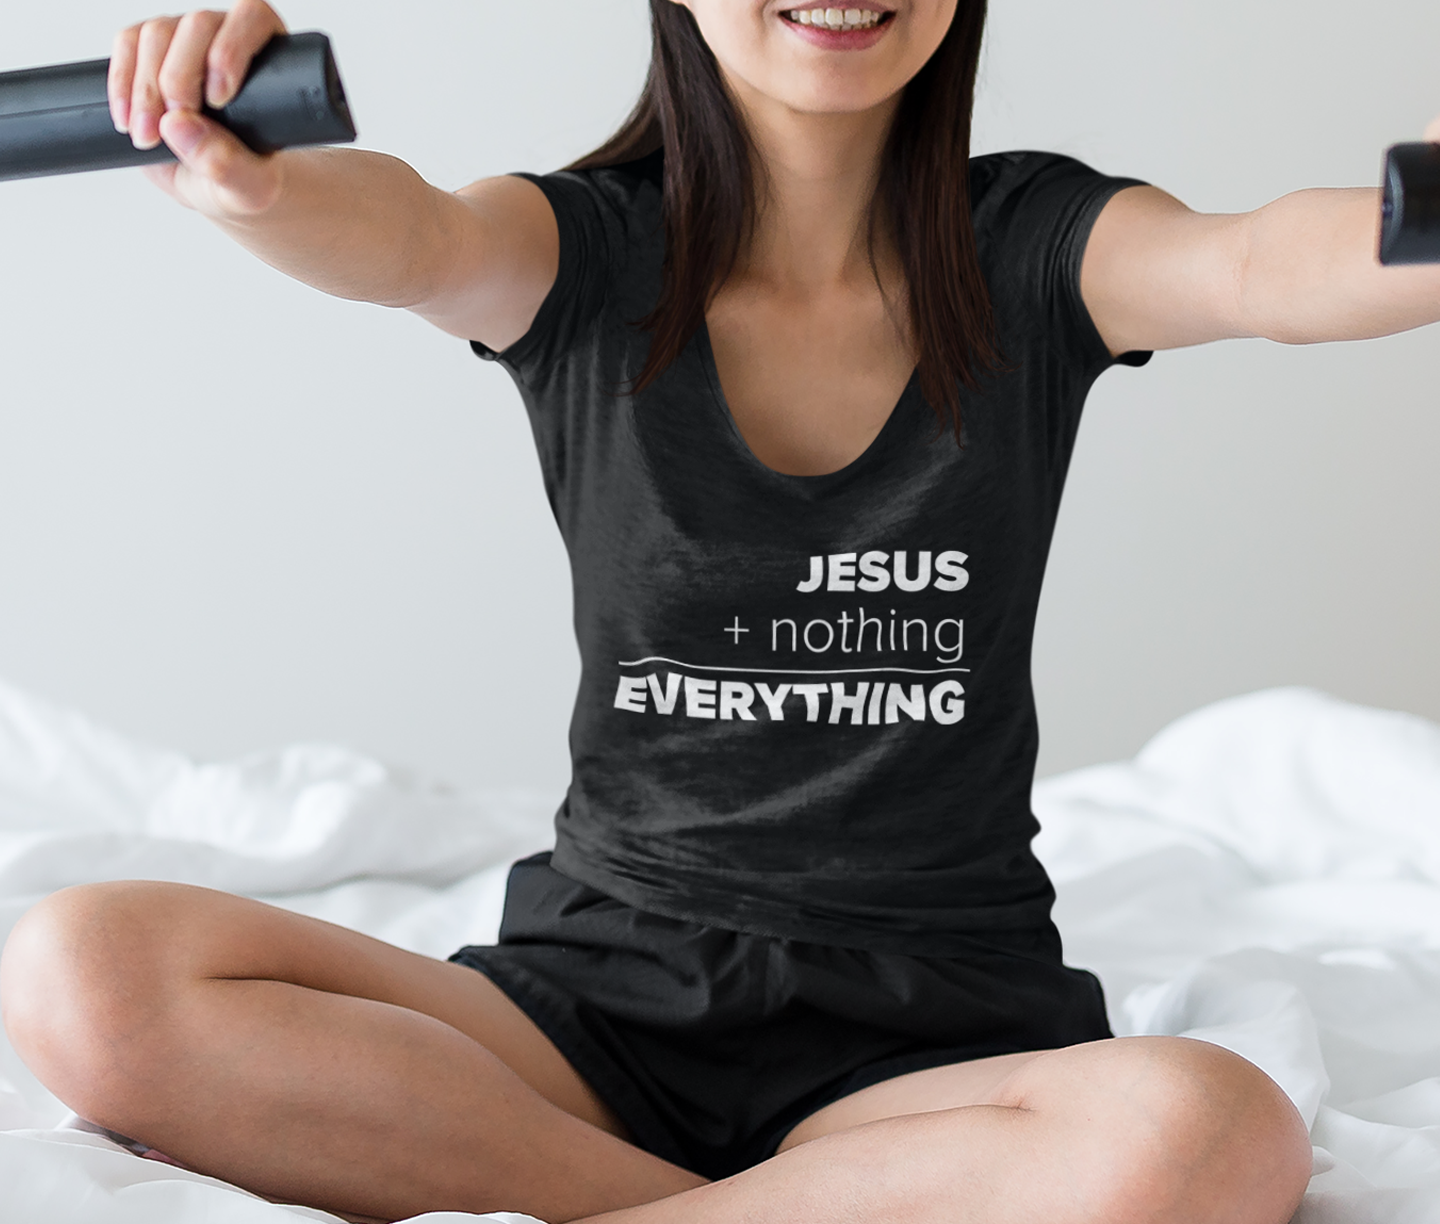 JESUS EQUALS EVERYTHING WOMEN'S FRONT - CHRISTIAN T-SHIRT